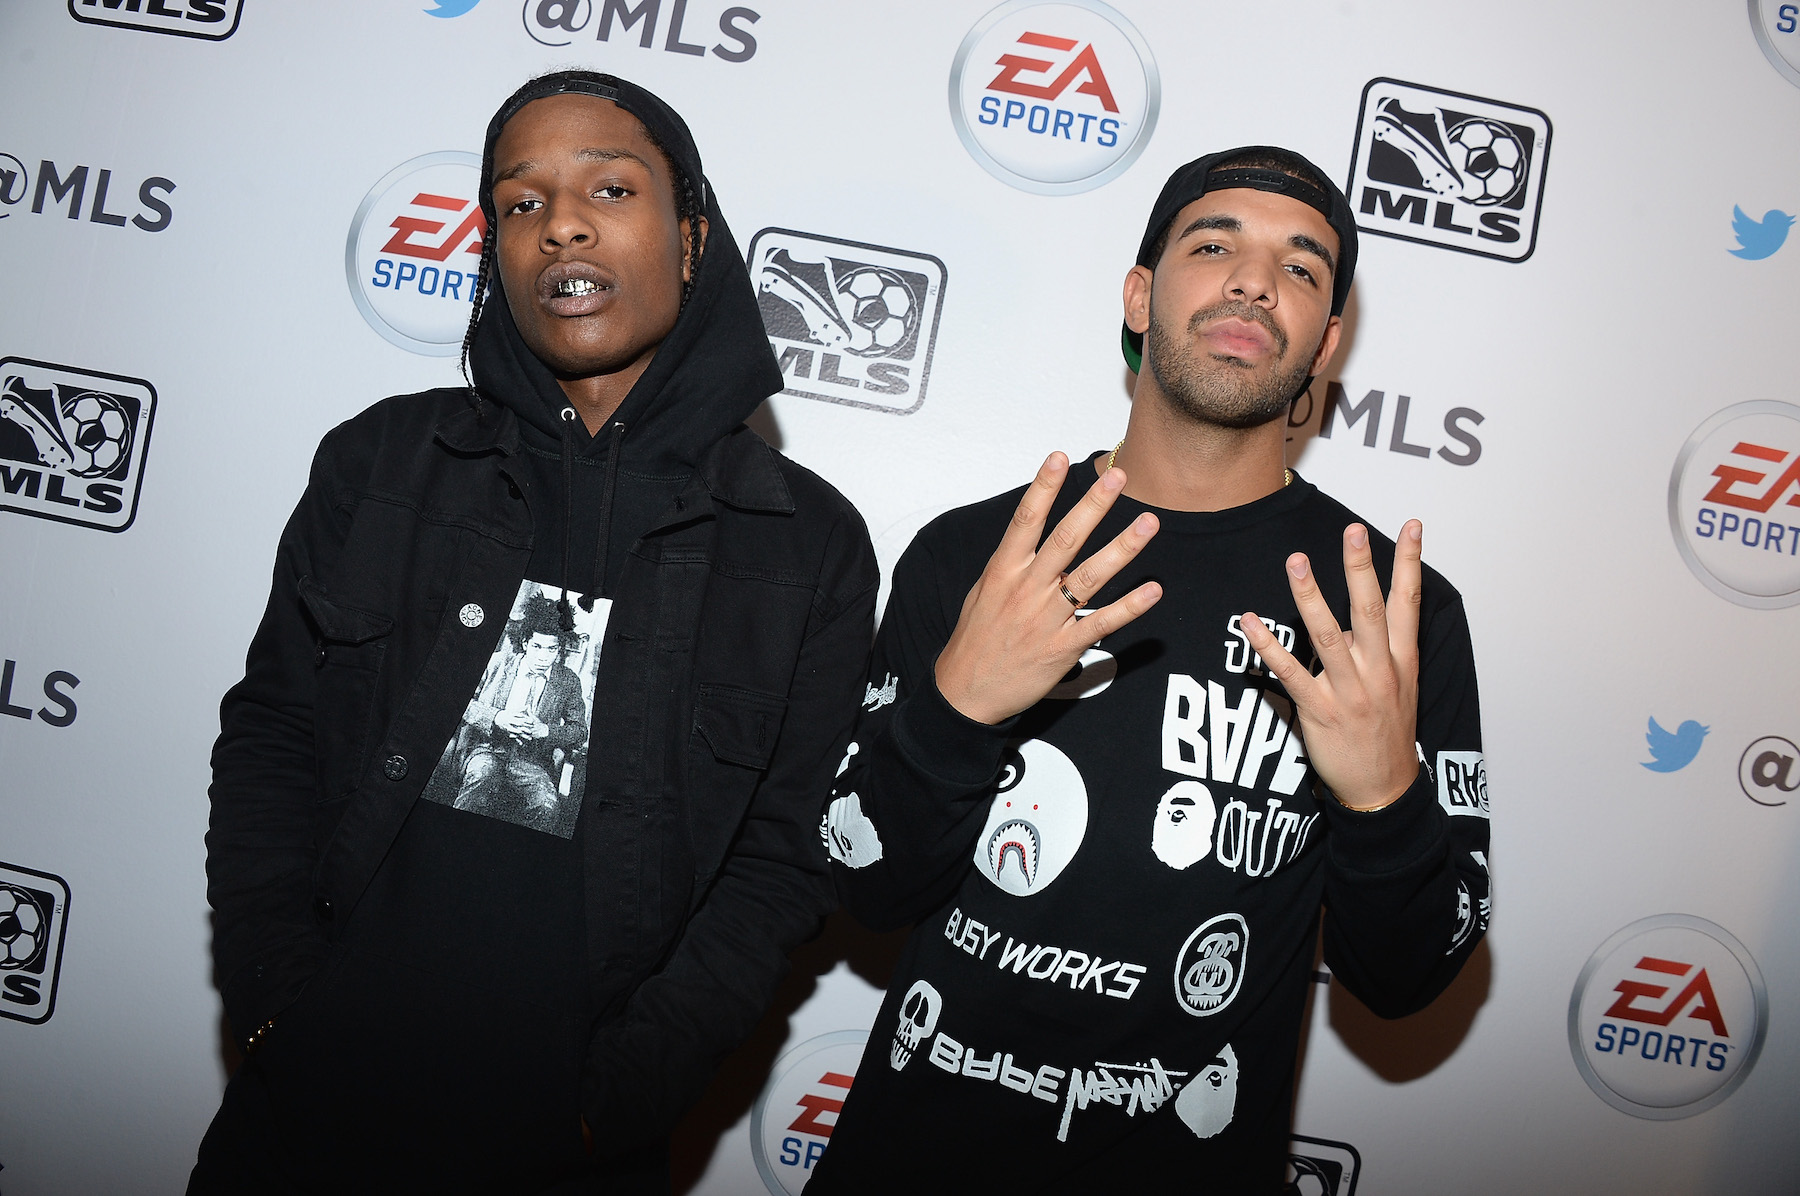 A$AP Rocky and Drake posing for a photo together